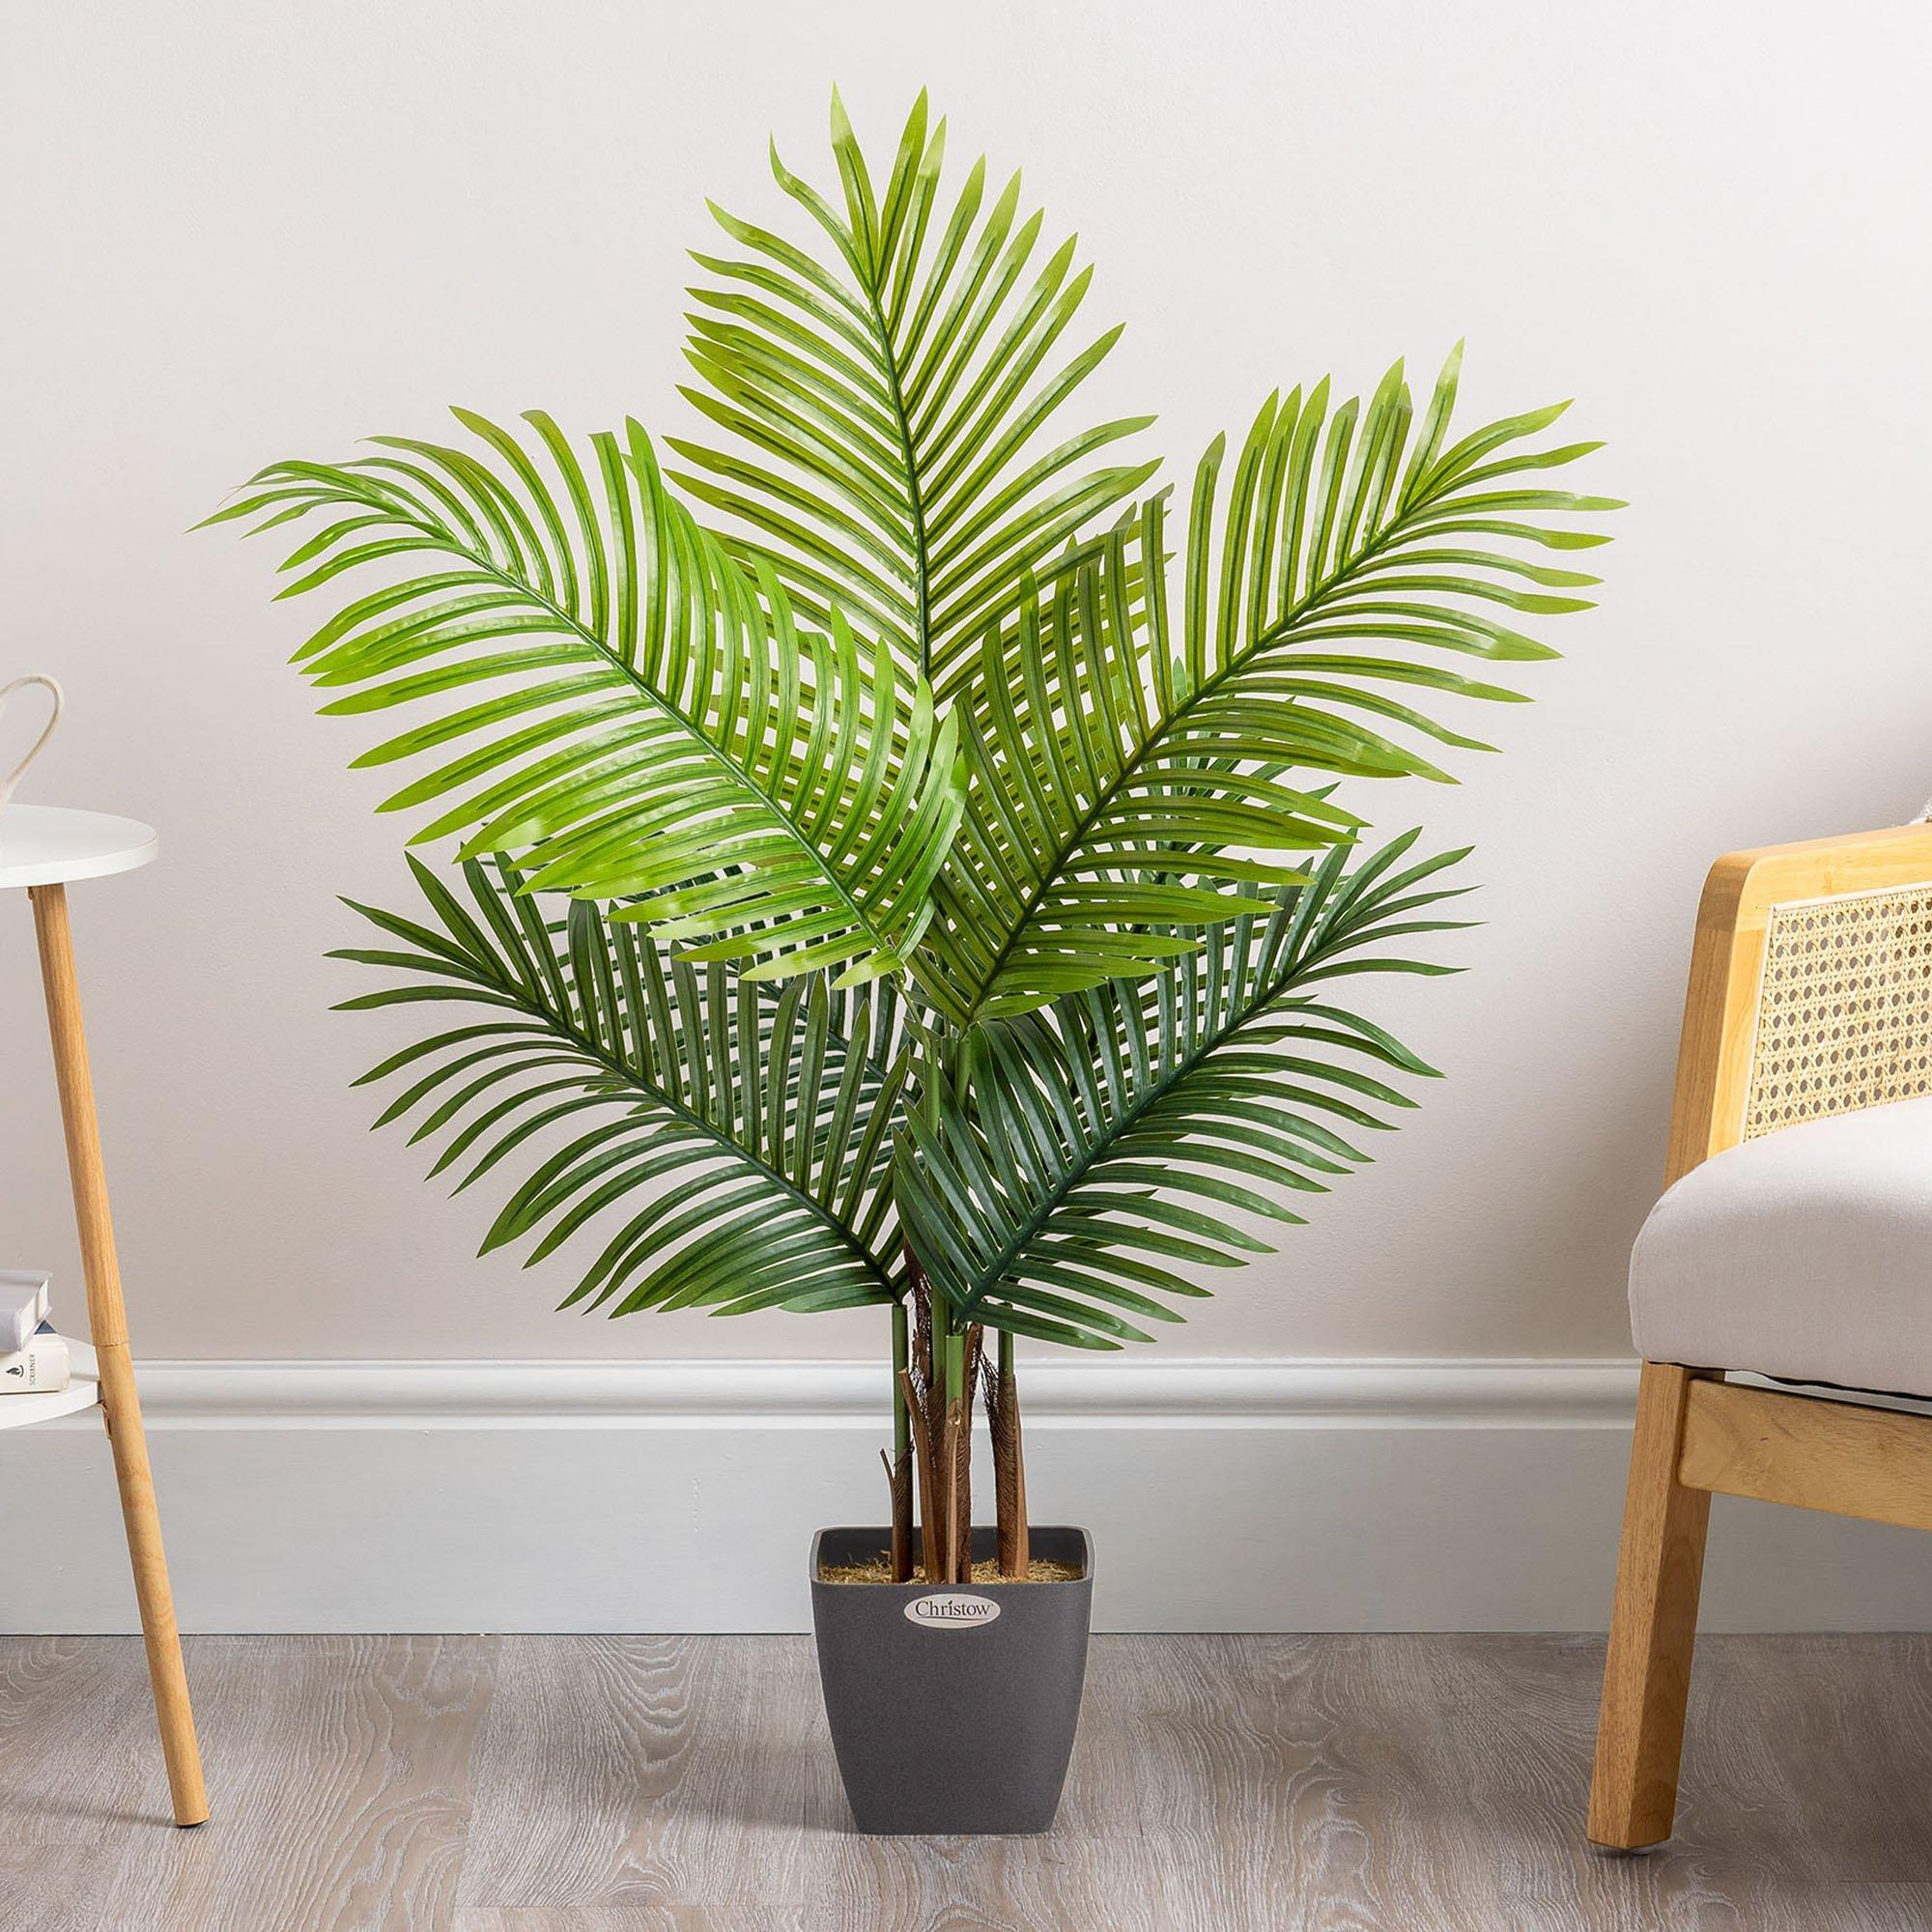 Artificial Areca Palm Tree Natural Looking Faux Plant in Pot - image 1